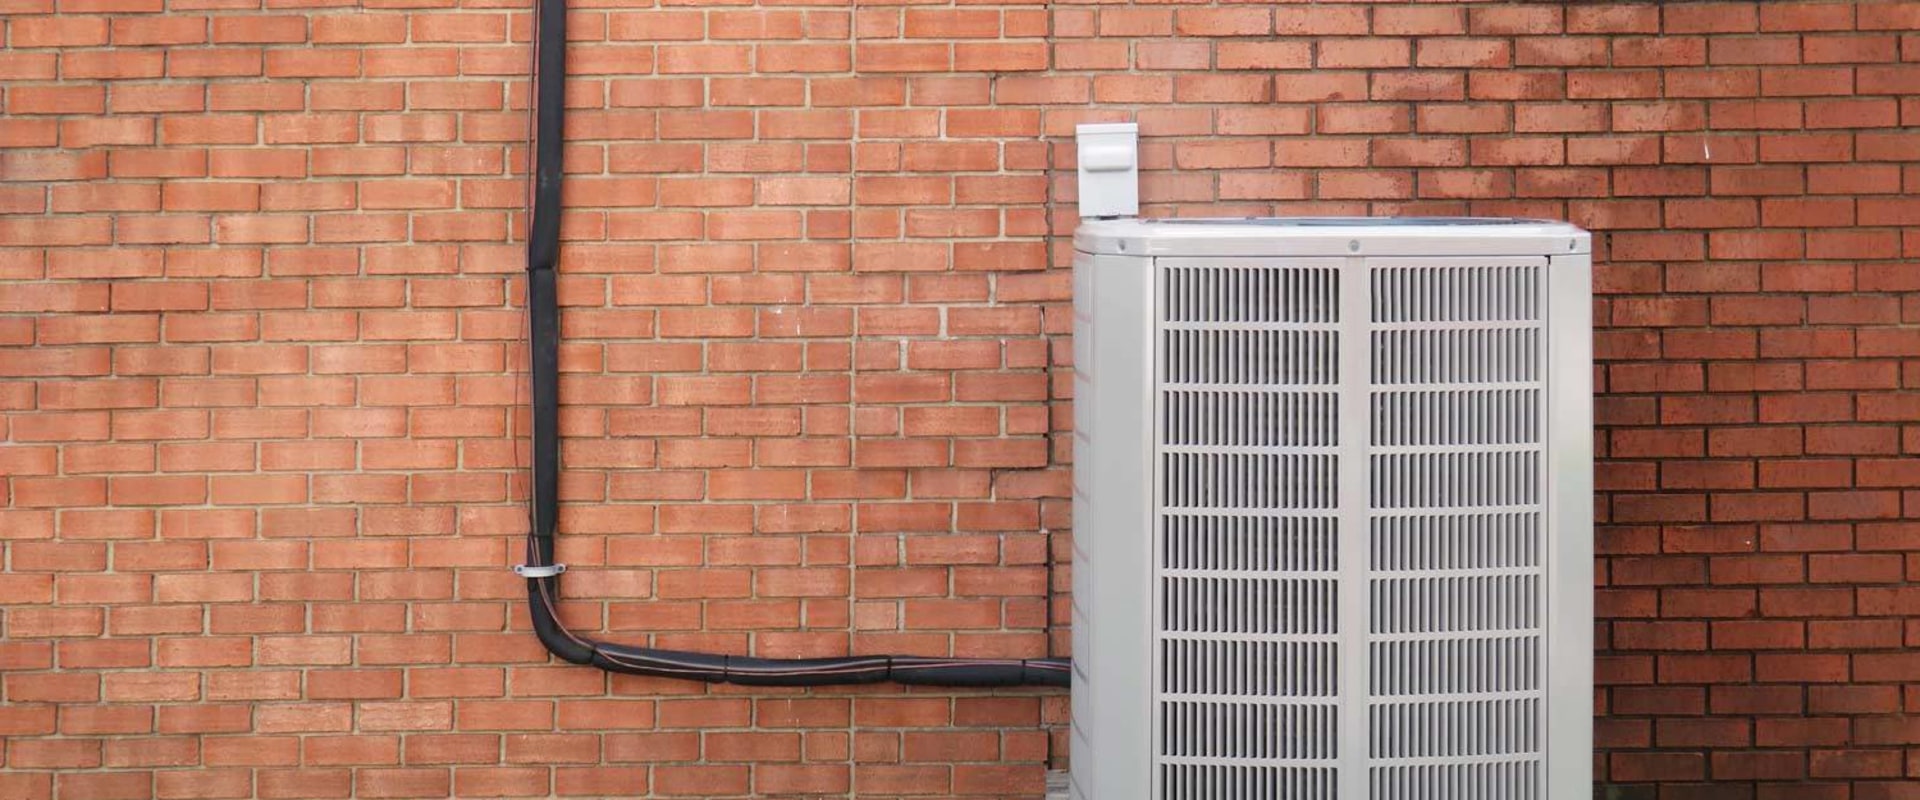 What is the most common type of hvac system?